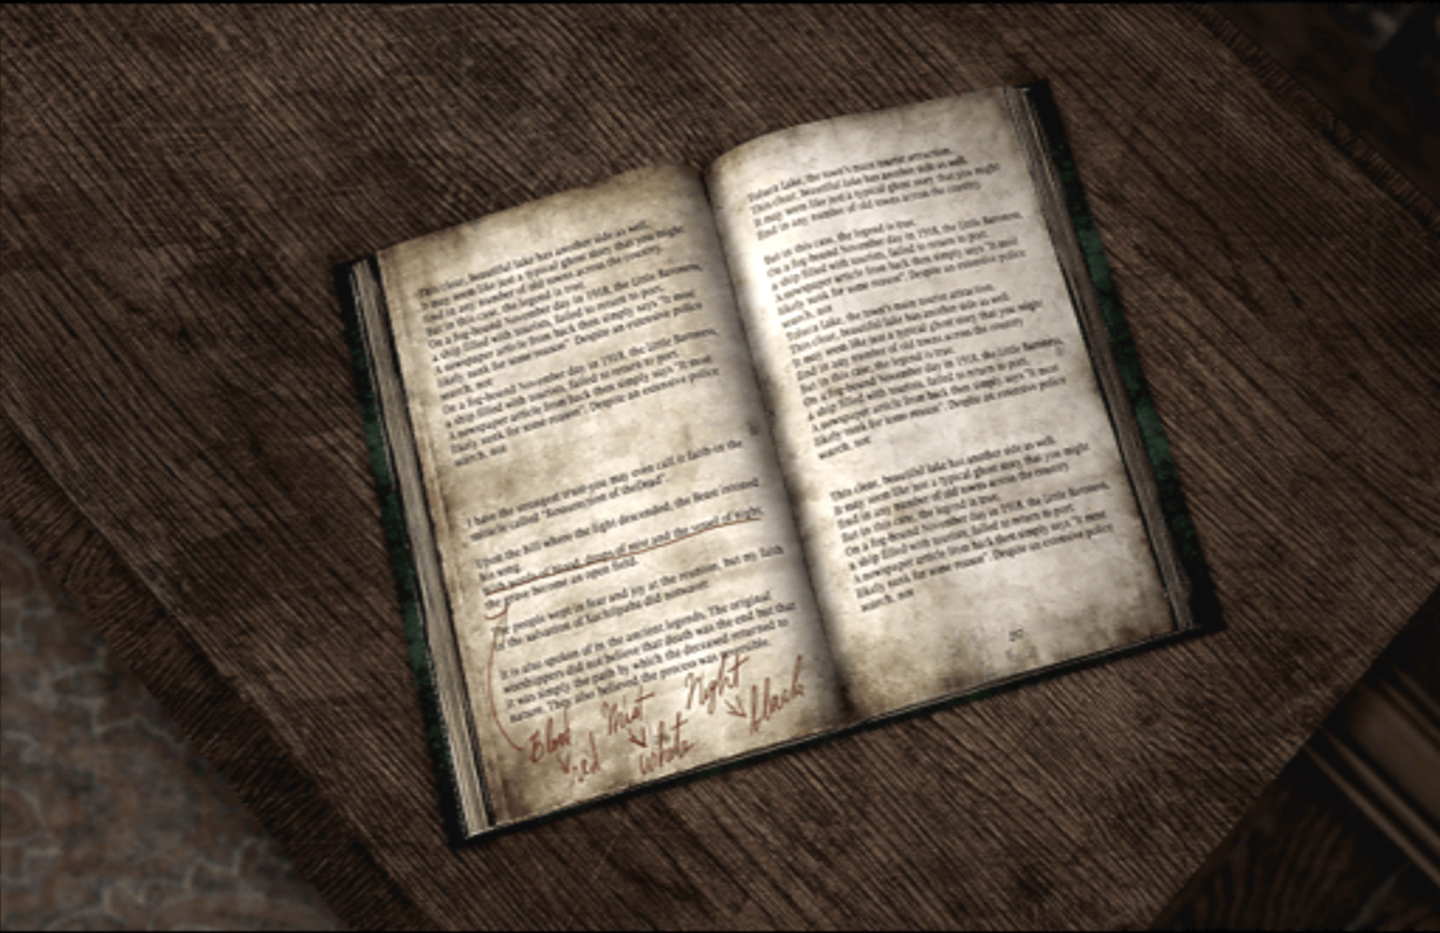 book of lost memories silent hill 2 download free